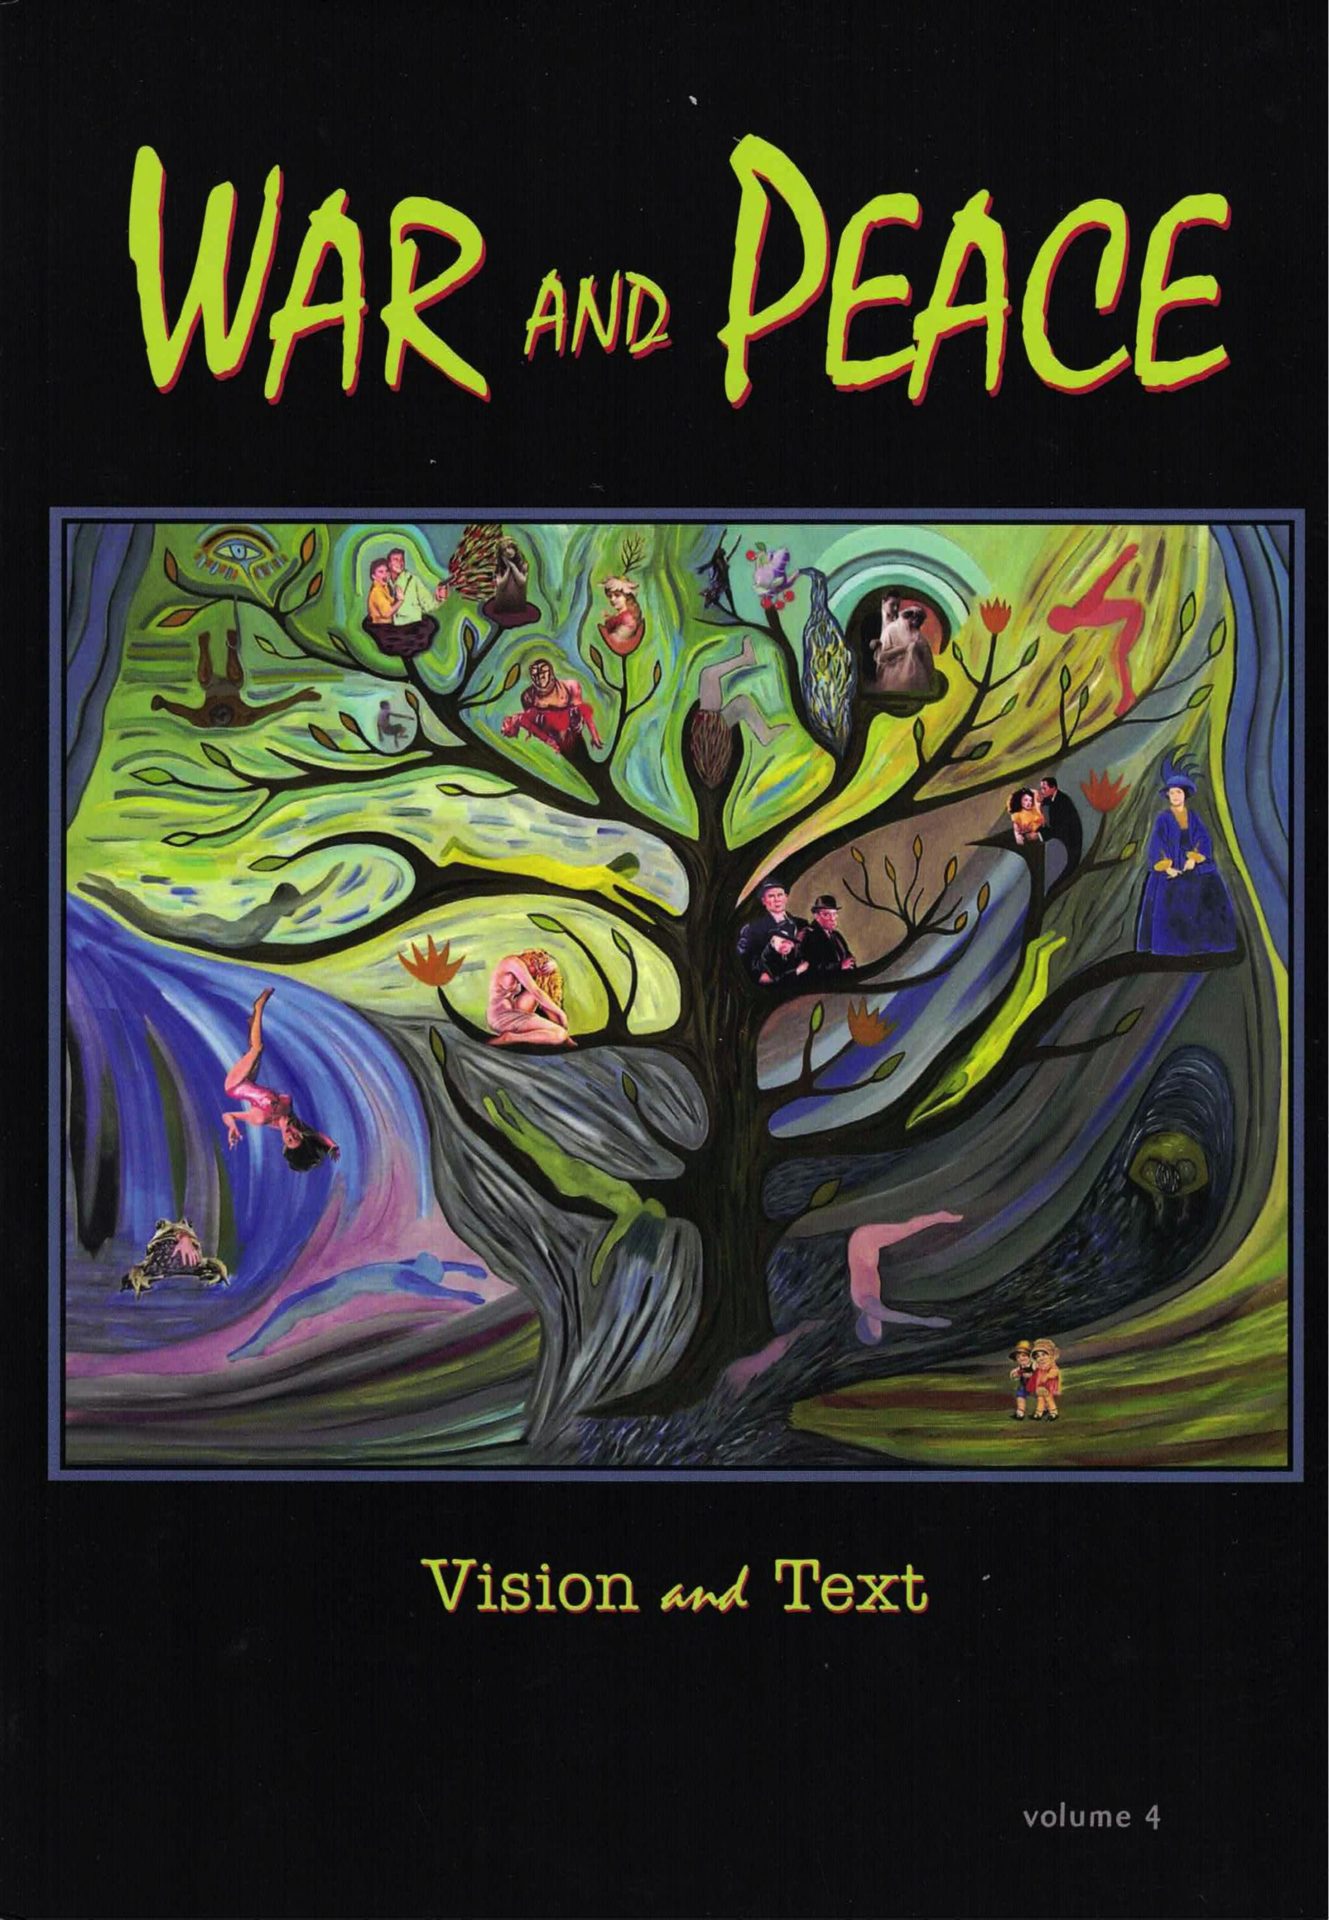 cover of War and Peace 4, Vision and Text, surreal cuoloful panting of a tree with images of people and animals as leaves on its branches